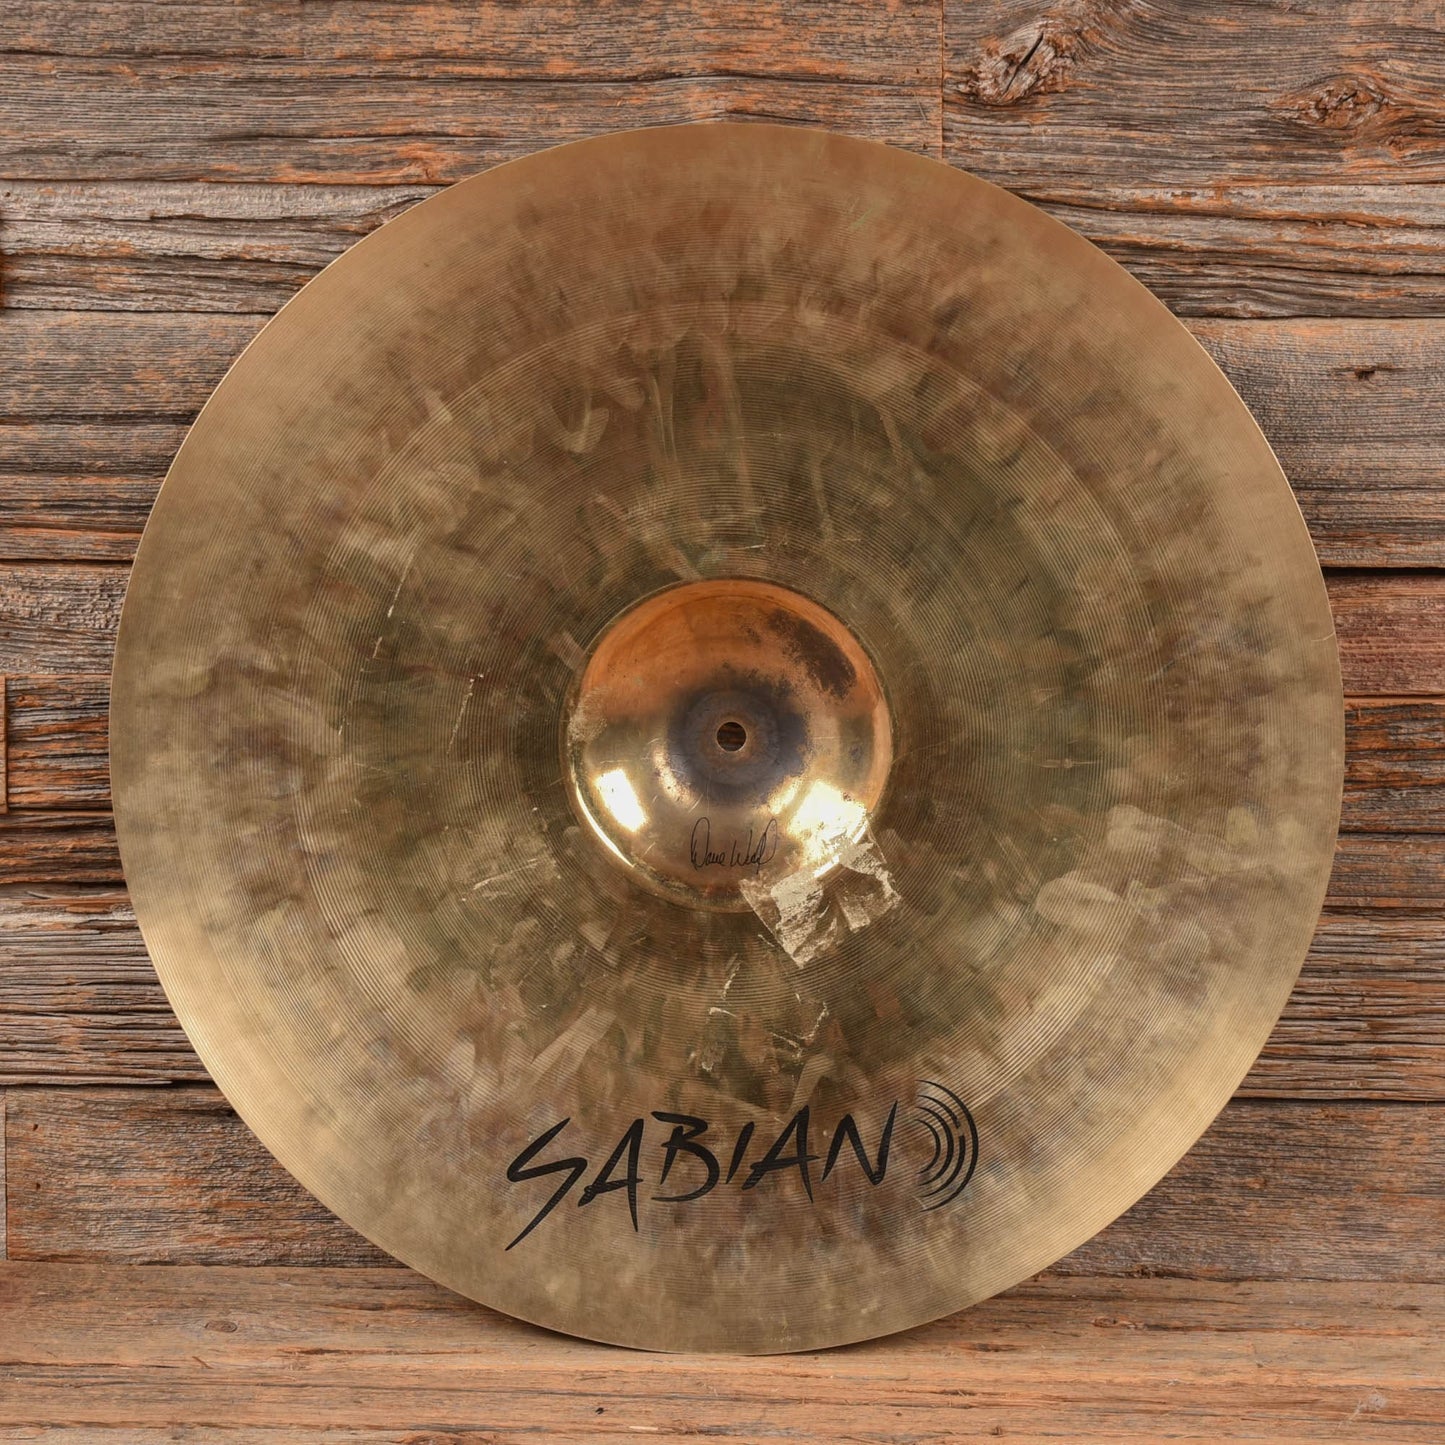 Sabian 21" HHX Evolution Ride Cymbal USED Drums and Percussion